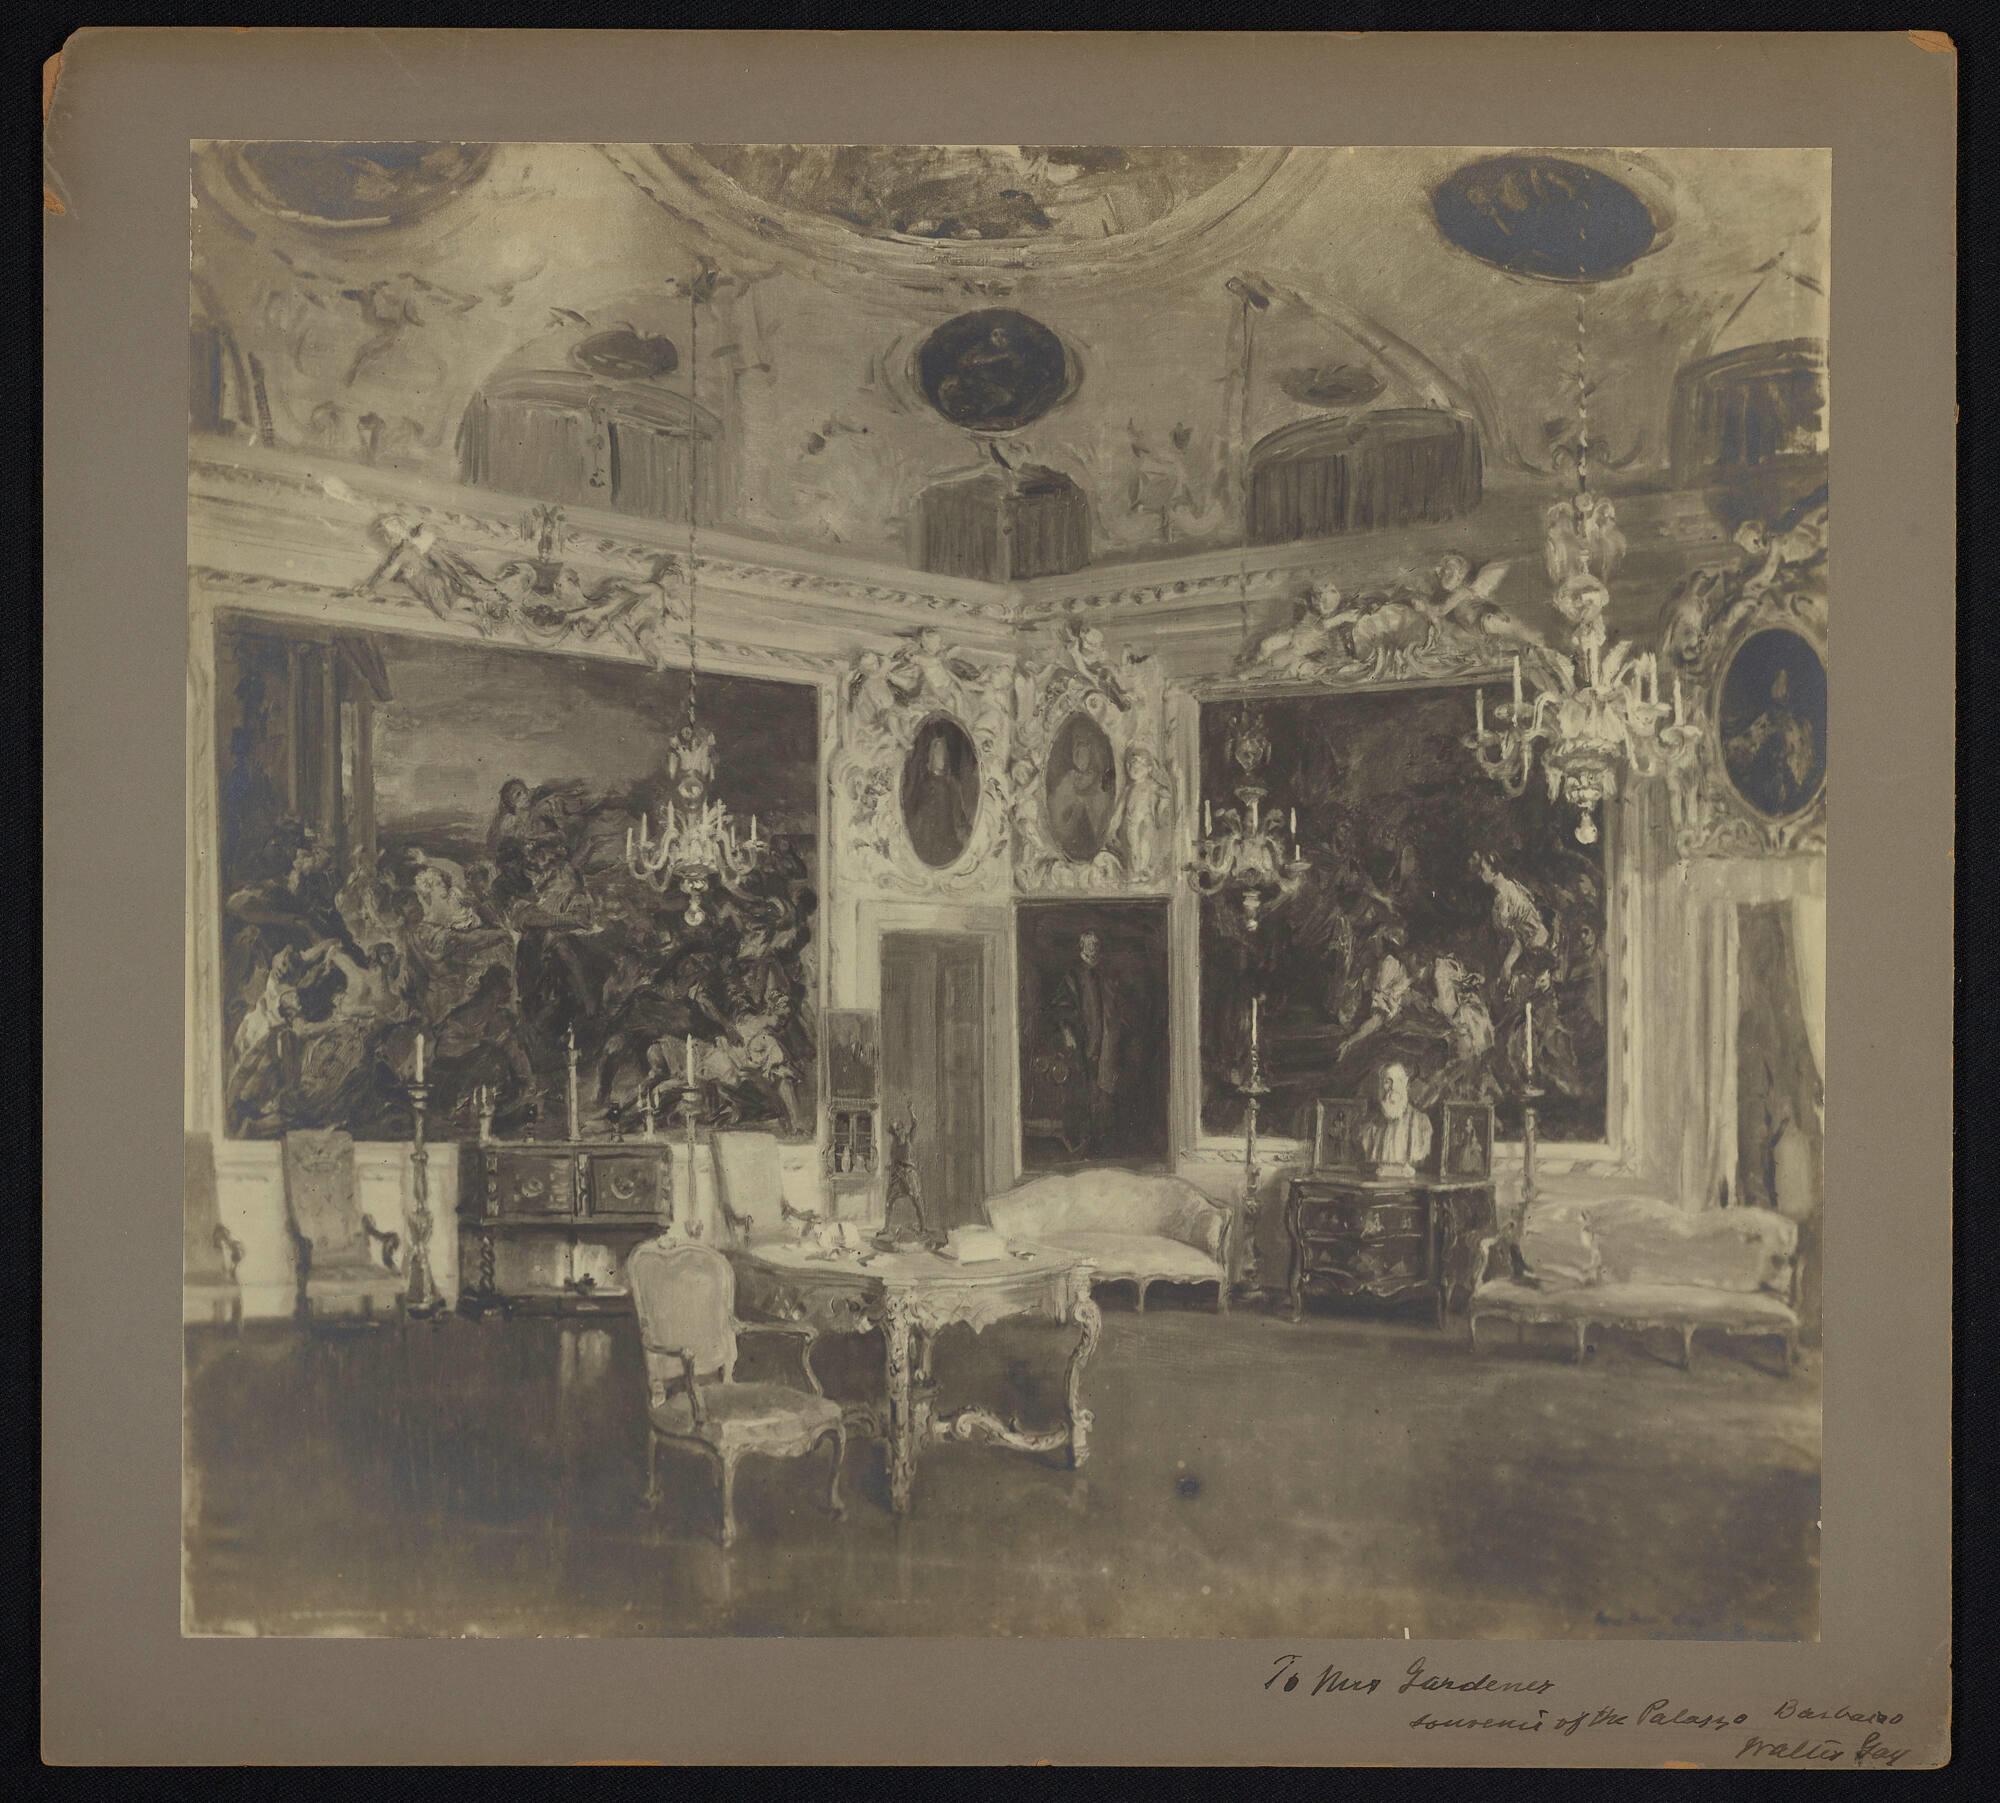 Photograph of a painting of a room inside Palazzo Barbaro.